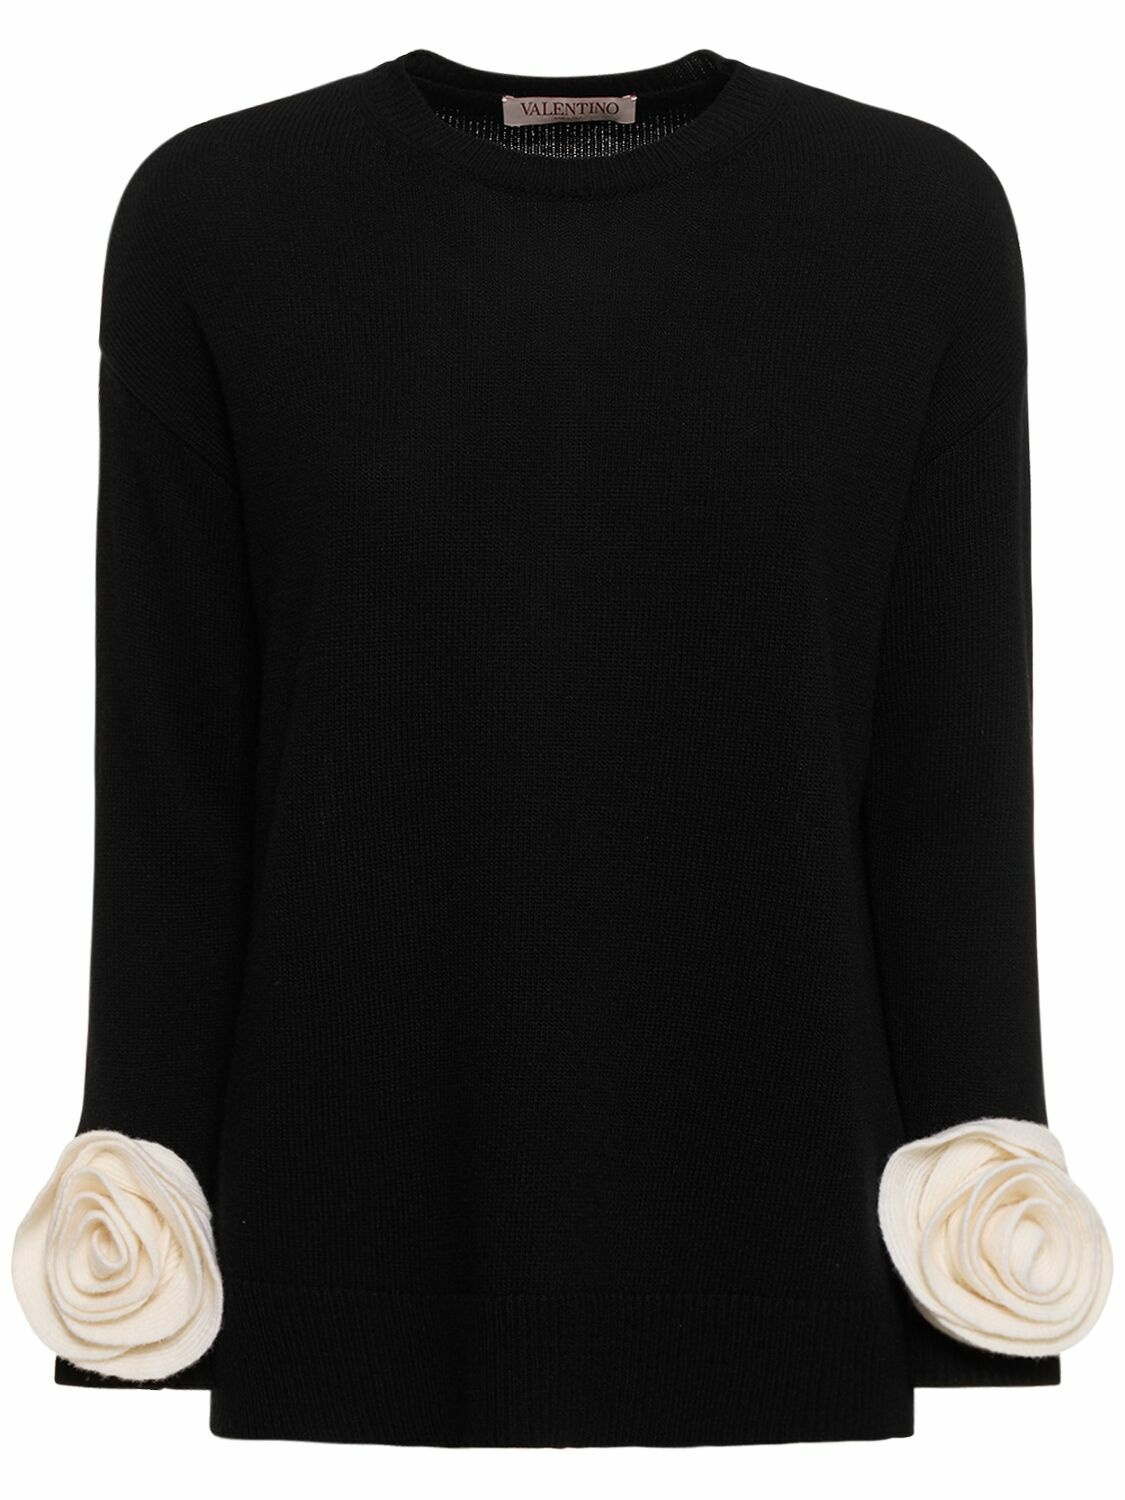 Photo: VALENTINO - Wool Knit Sweater W/ Collar And Roses